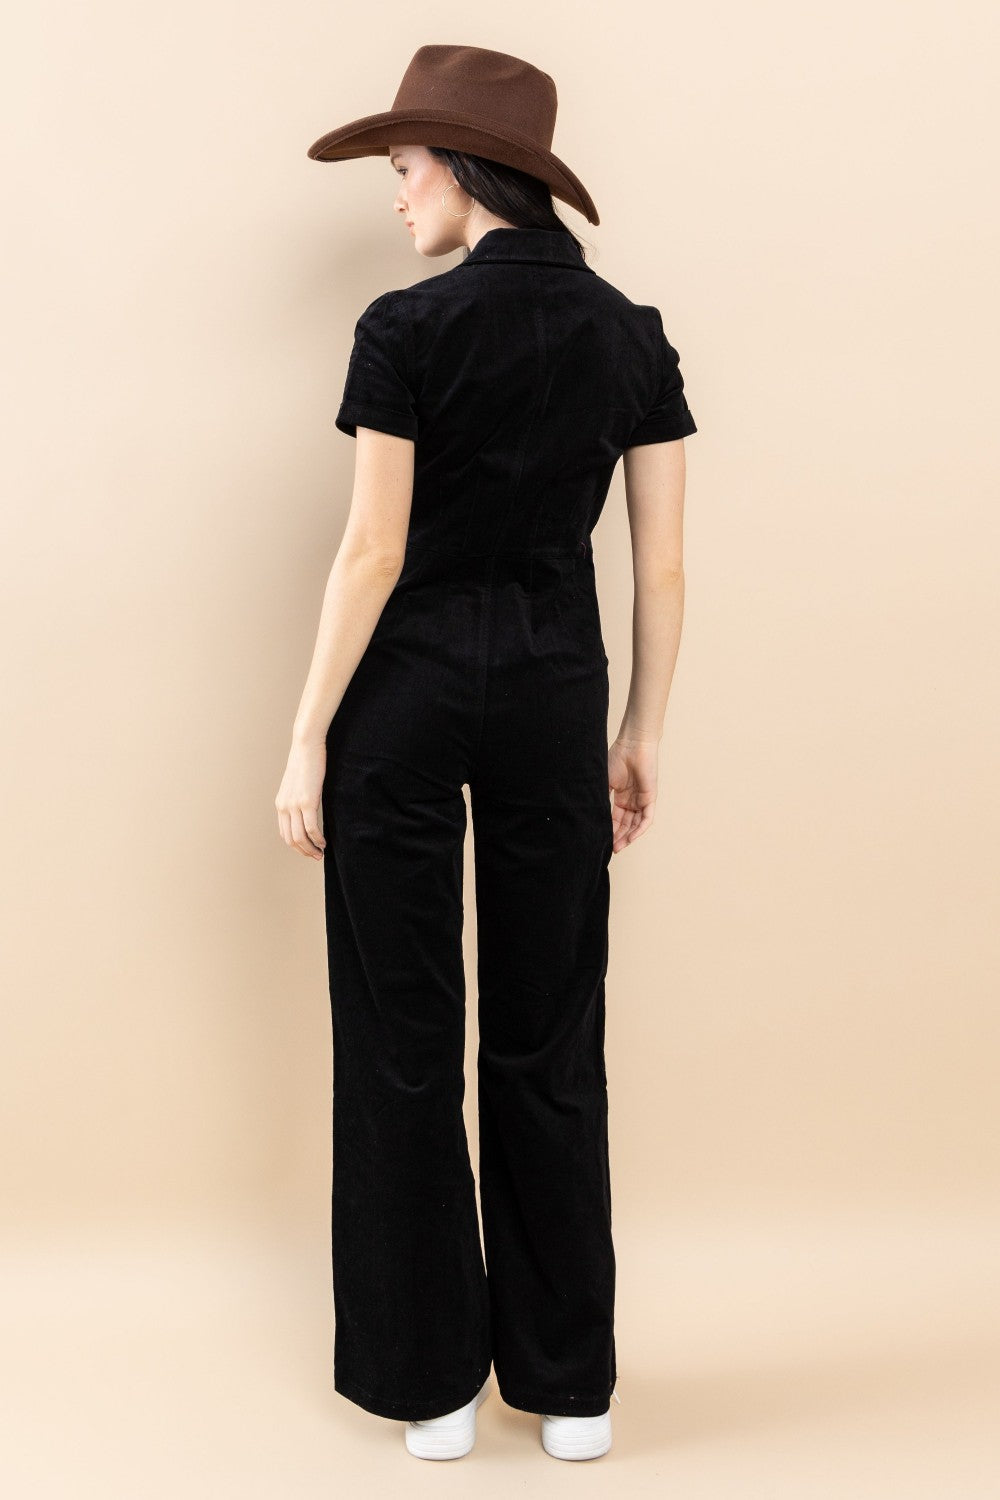 This classic corduroy jumpsuit is the perfect addition to your wardrobe! Crafted from solid corduroy fabric and featuring a zip-up closer and side pockets, it's both stylish and comfortable. Complete with a basic collared design, this jumpsuit is an ideal pick for any fashionista!